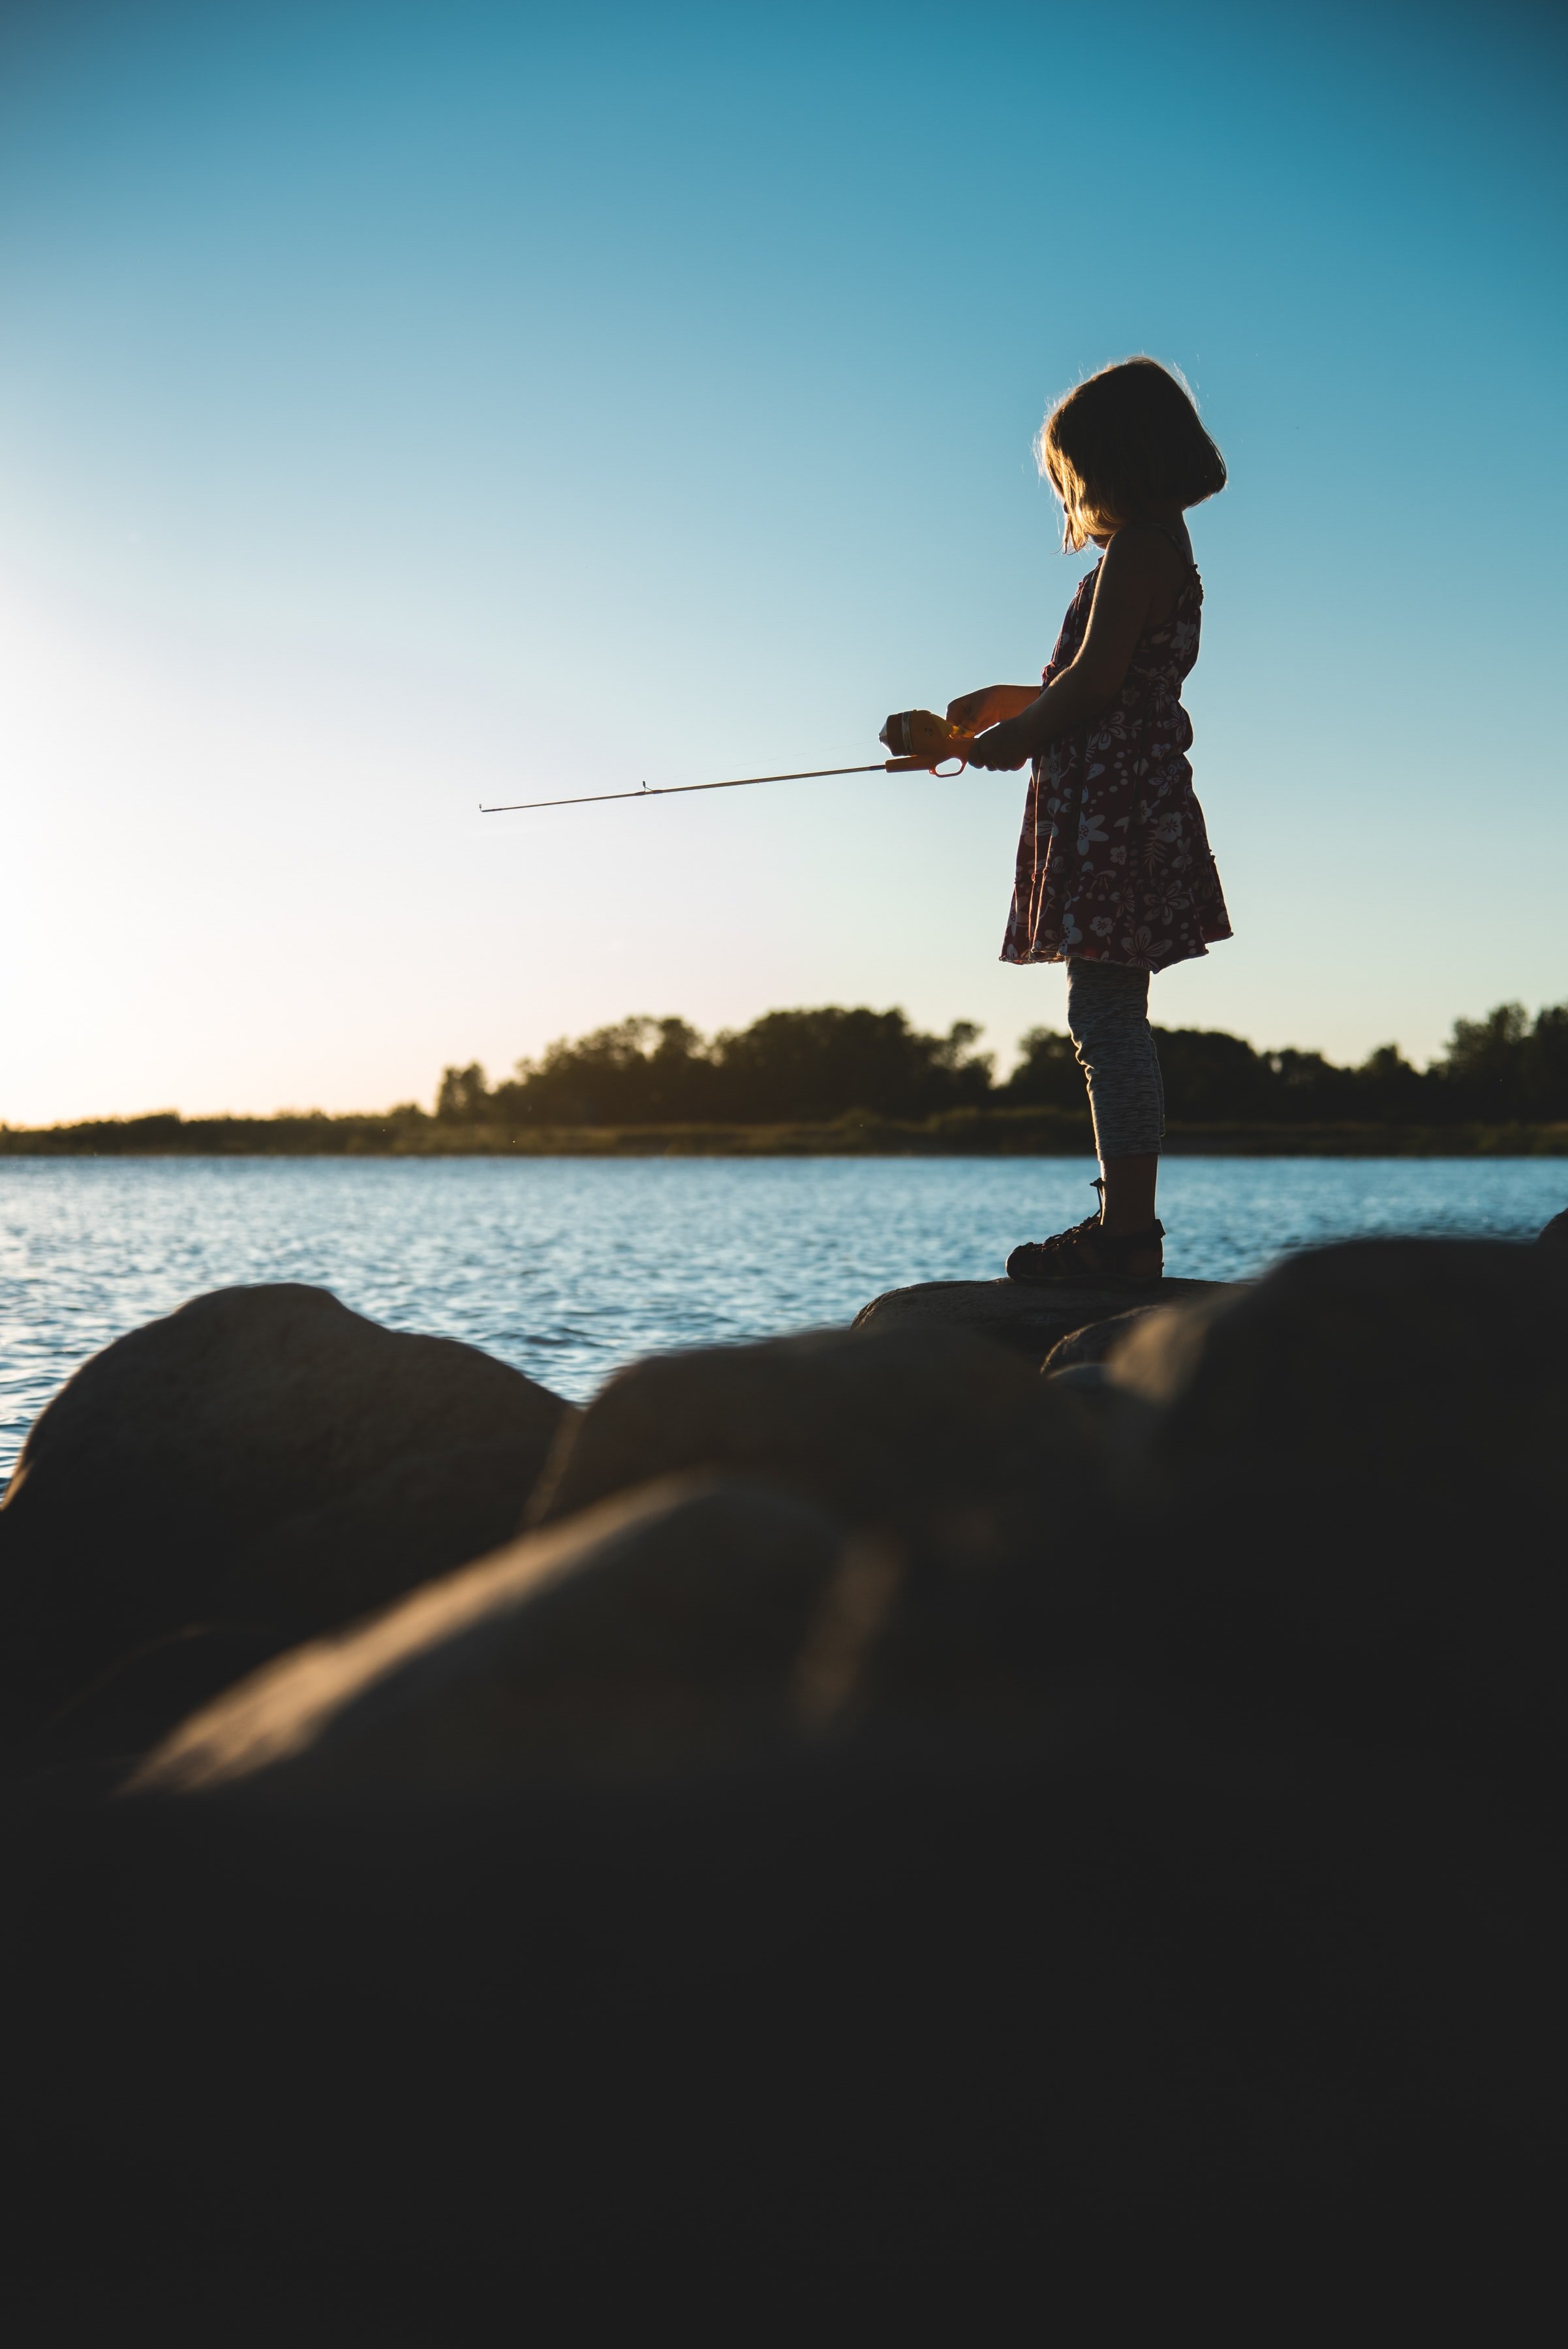 Don taught May how to fish and hunt. | Source: Unsplash